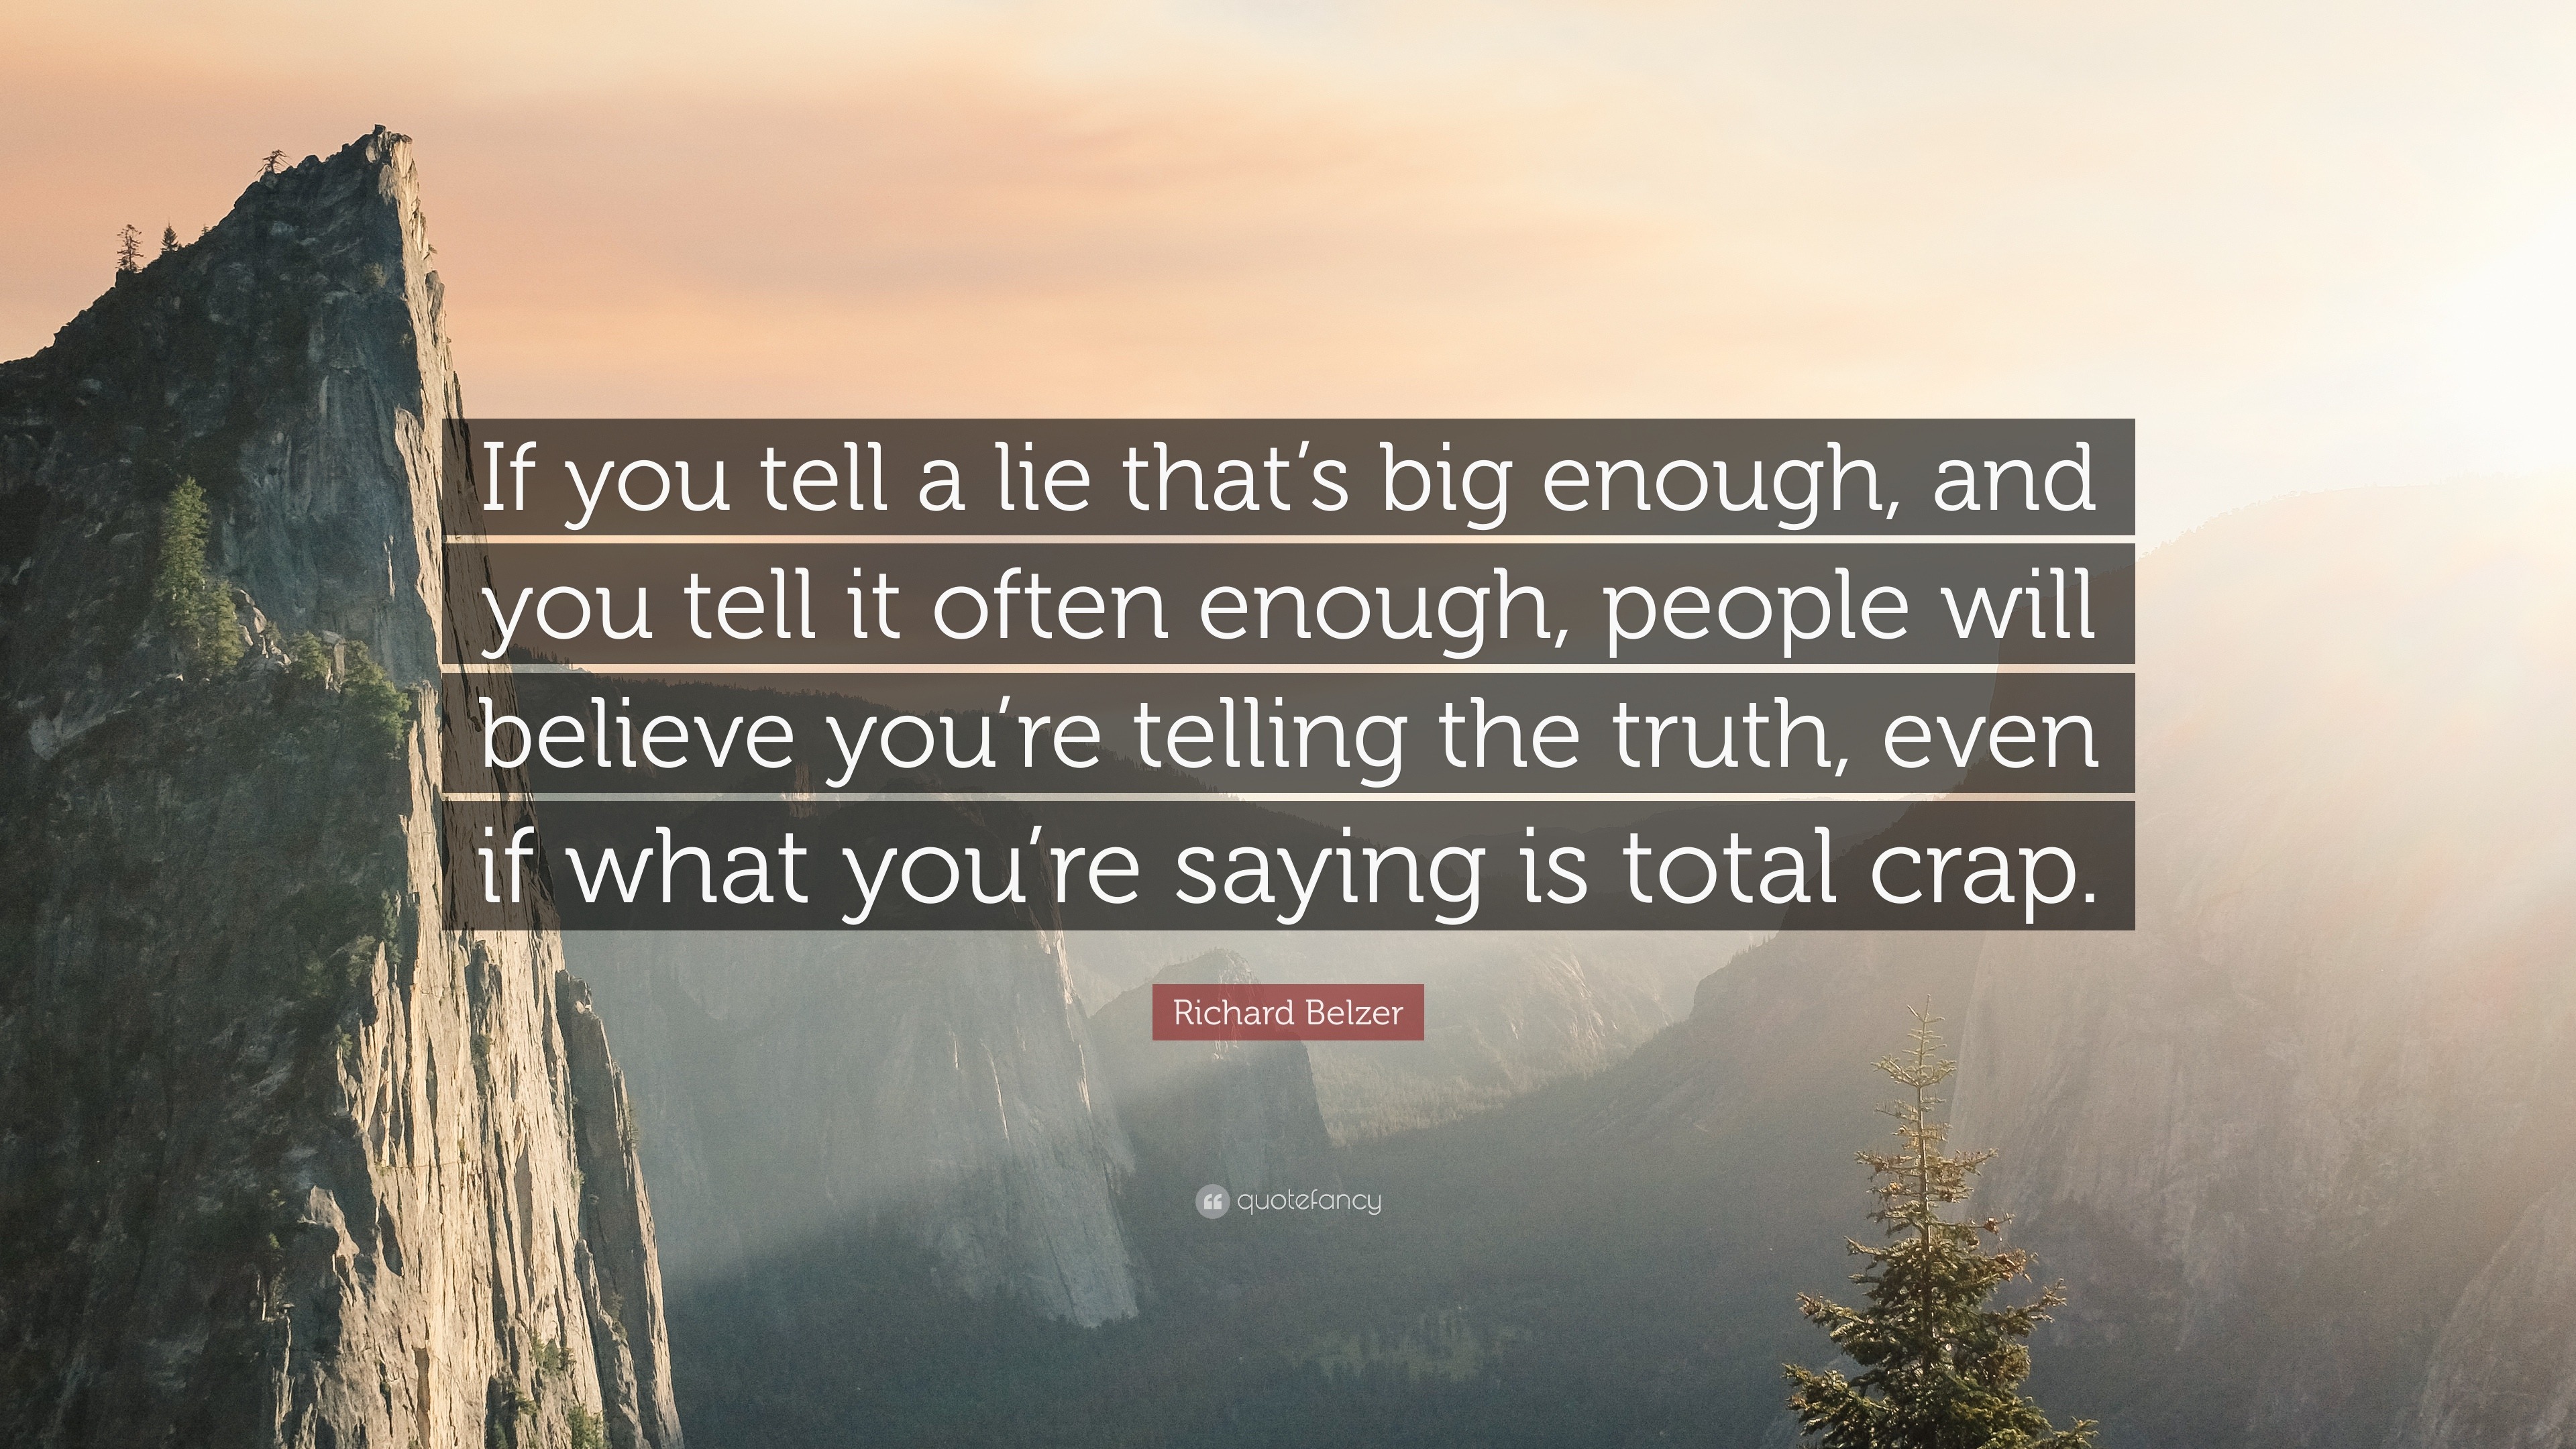 Richard Belzer Quote: “If you tell a lie that's big enough, and you tell it  often enough, people will believe you're telling the truth, even if...”